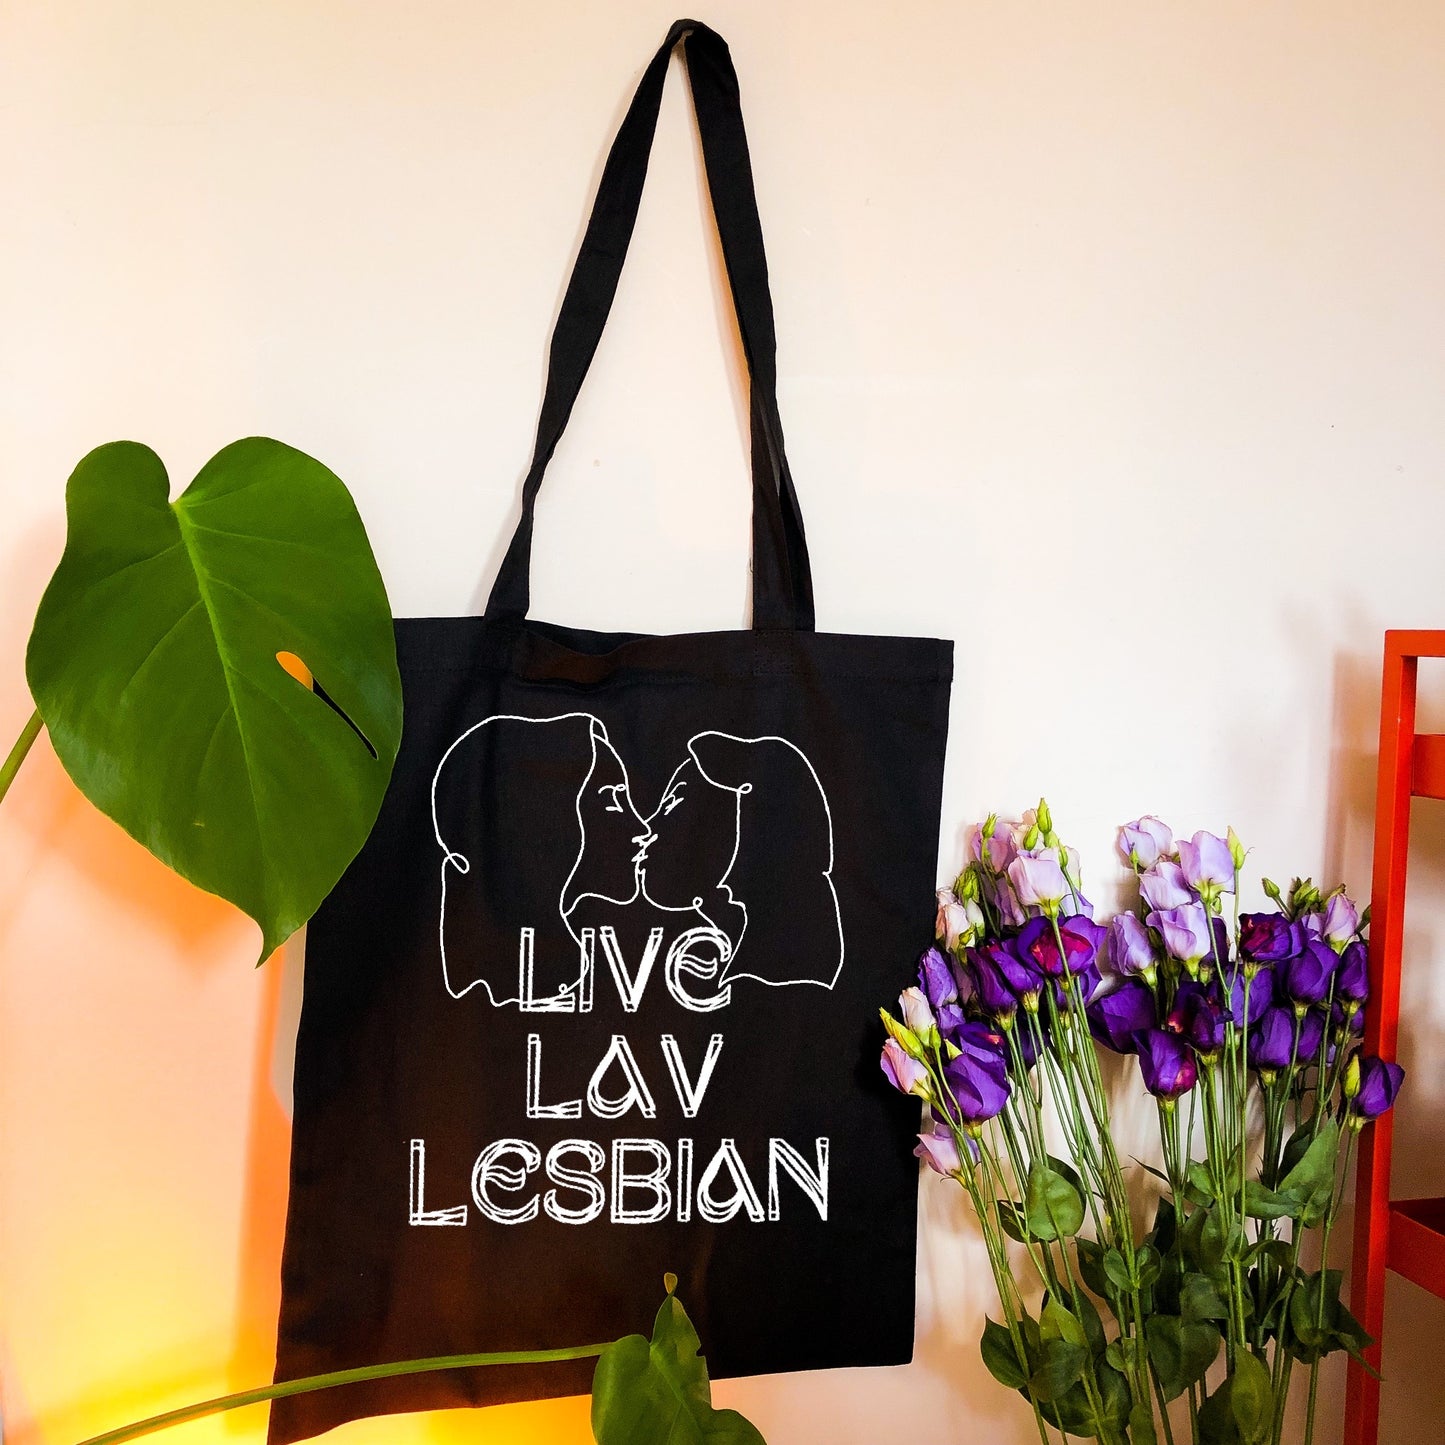 Liv Lav Lesbian, black tote bag with white vinyl text and image. Leftbians Collab with Lavender Rodriguez